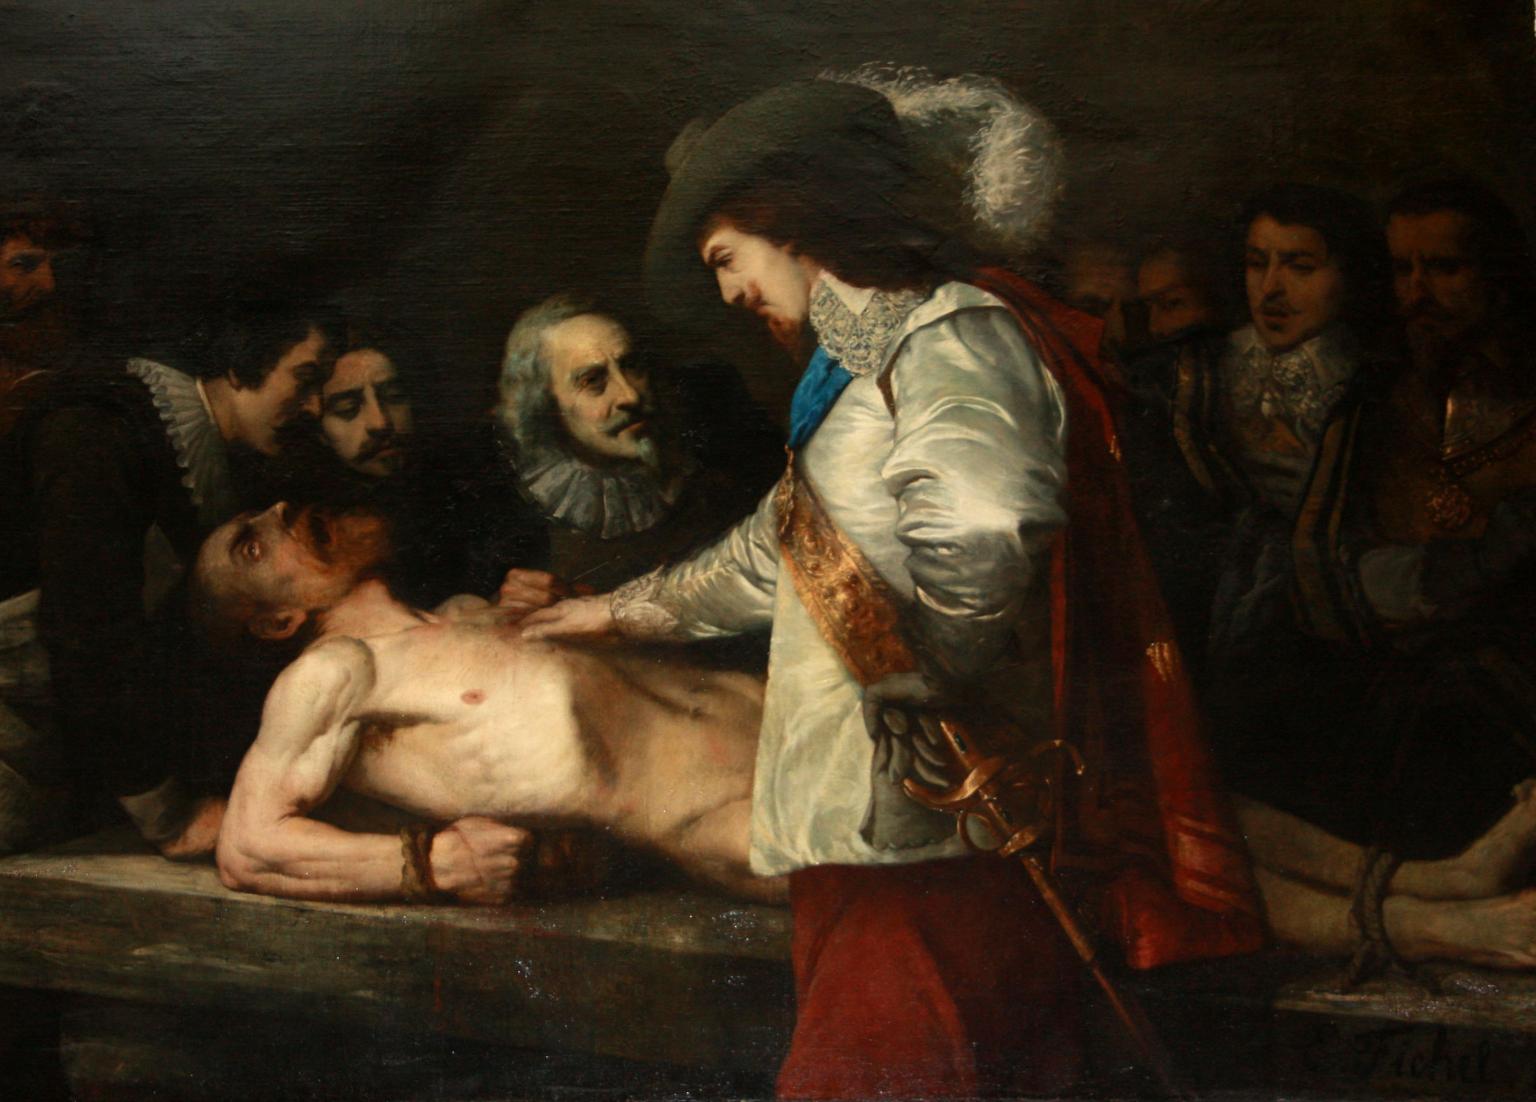 Painting of well-dressed man in hat with plume and sword putting his hand on the chest of a nude man tied down prone on a table with face upturned and mouth open, as several well-dressed men look on from the far side of the table. 